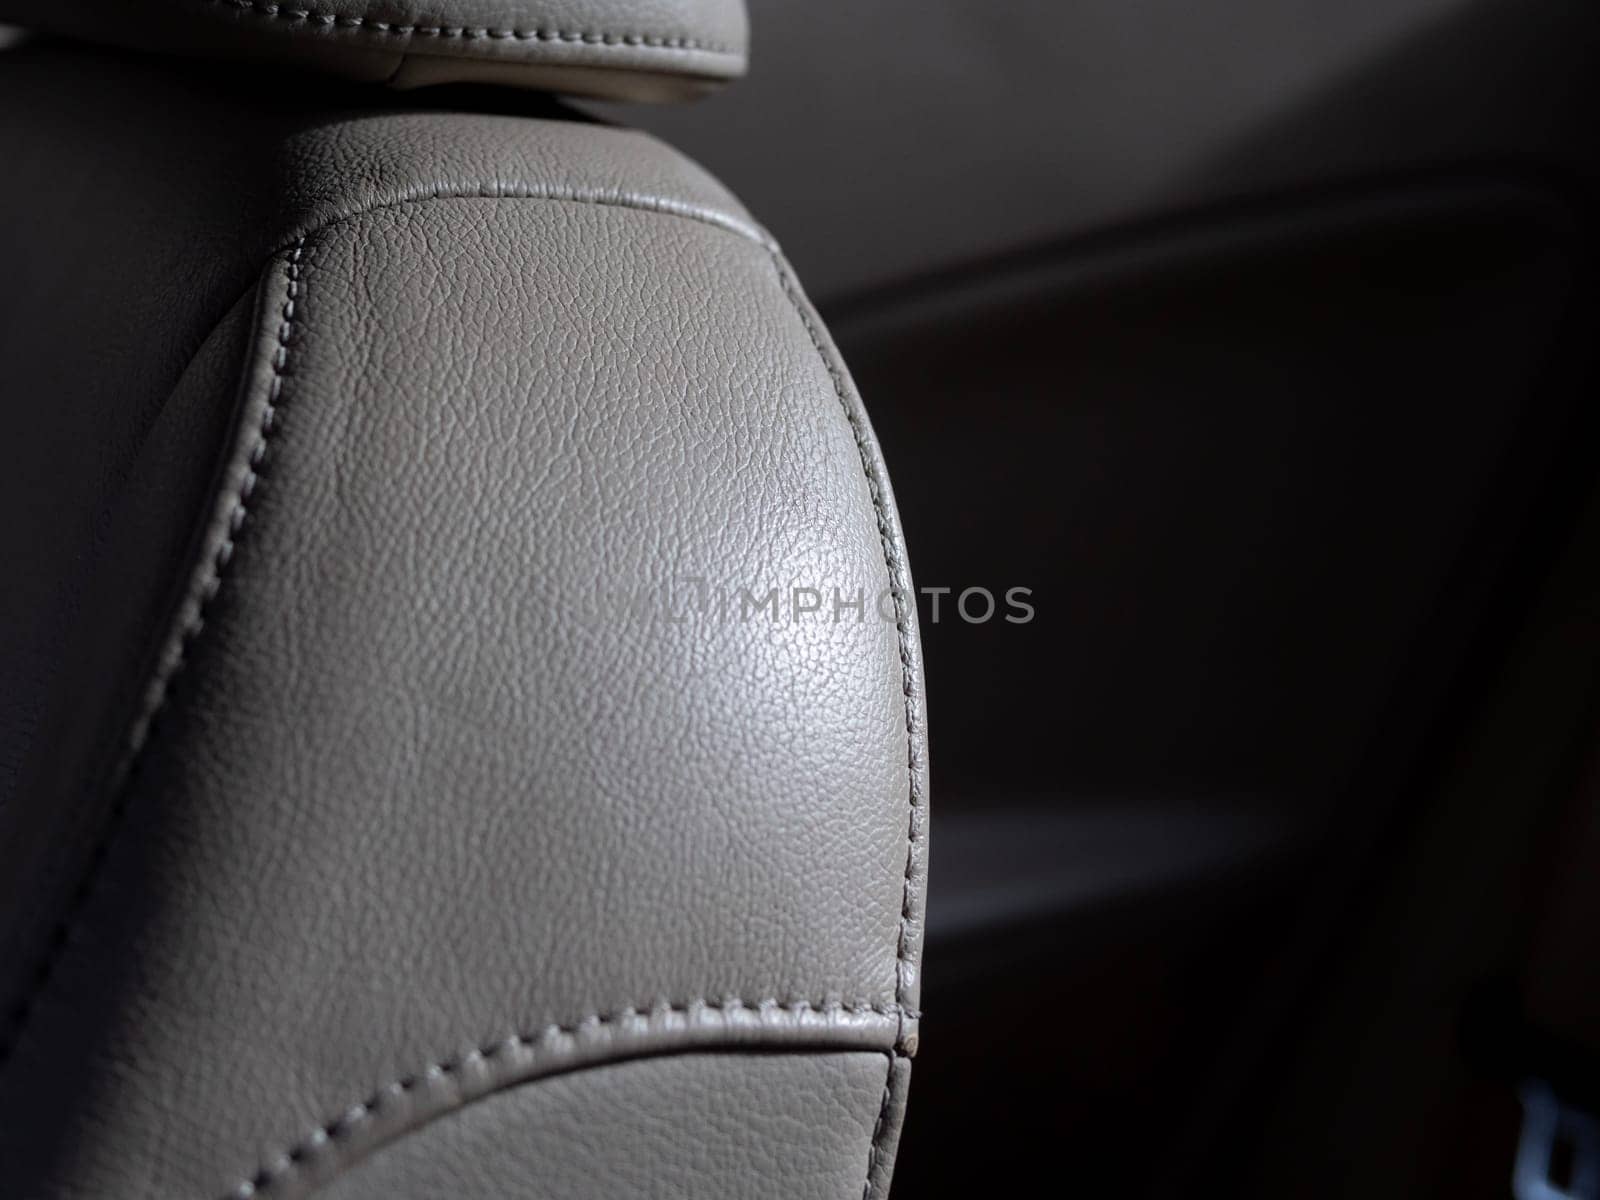 Part of leather car seat details. close up detail